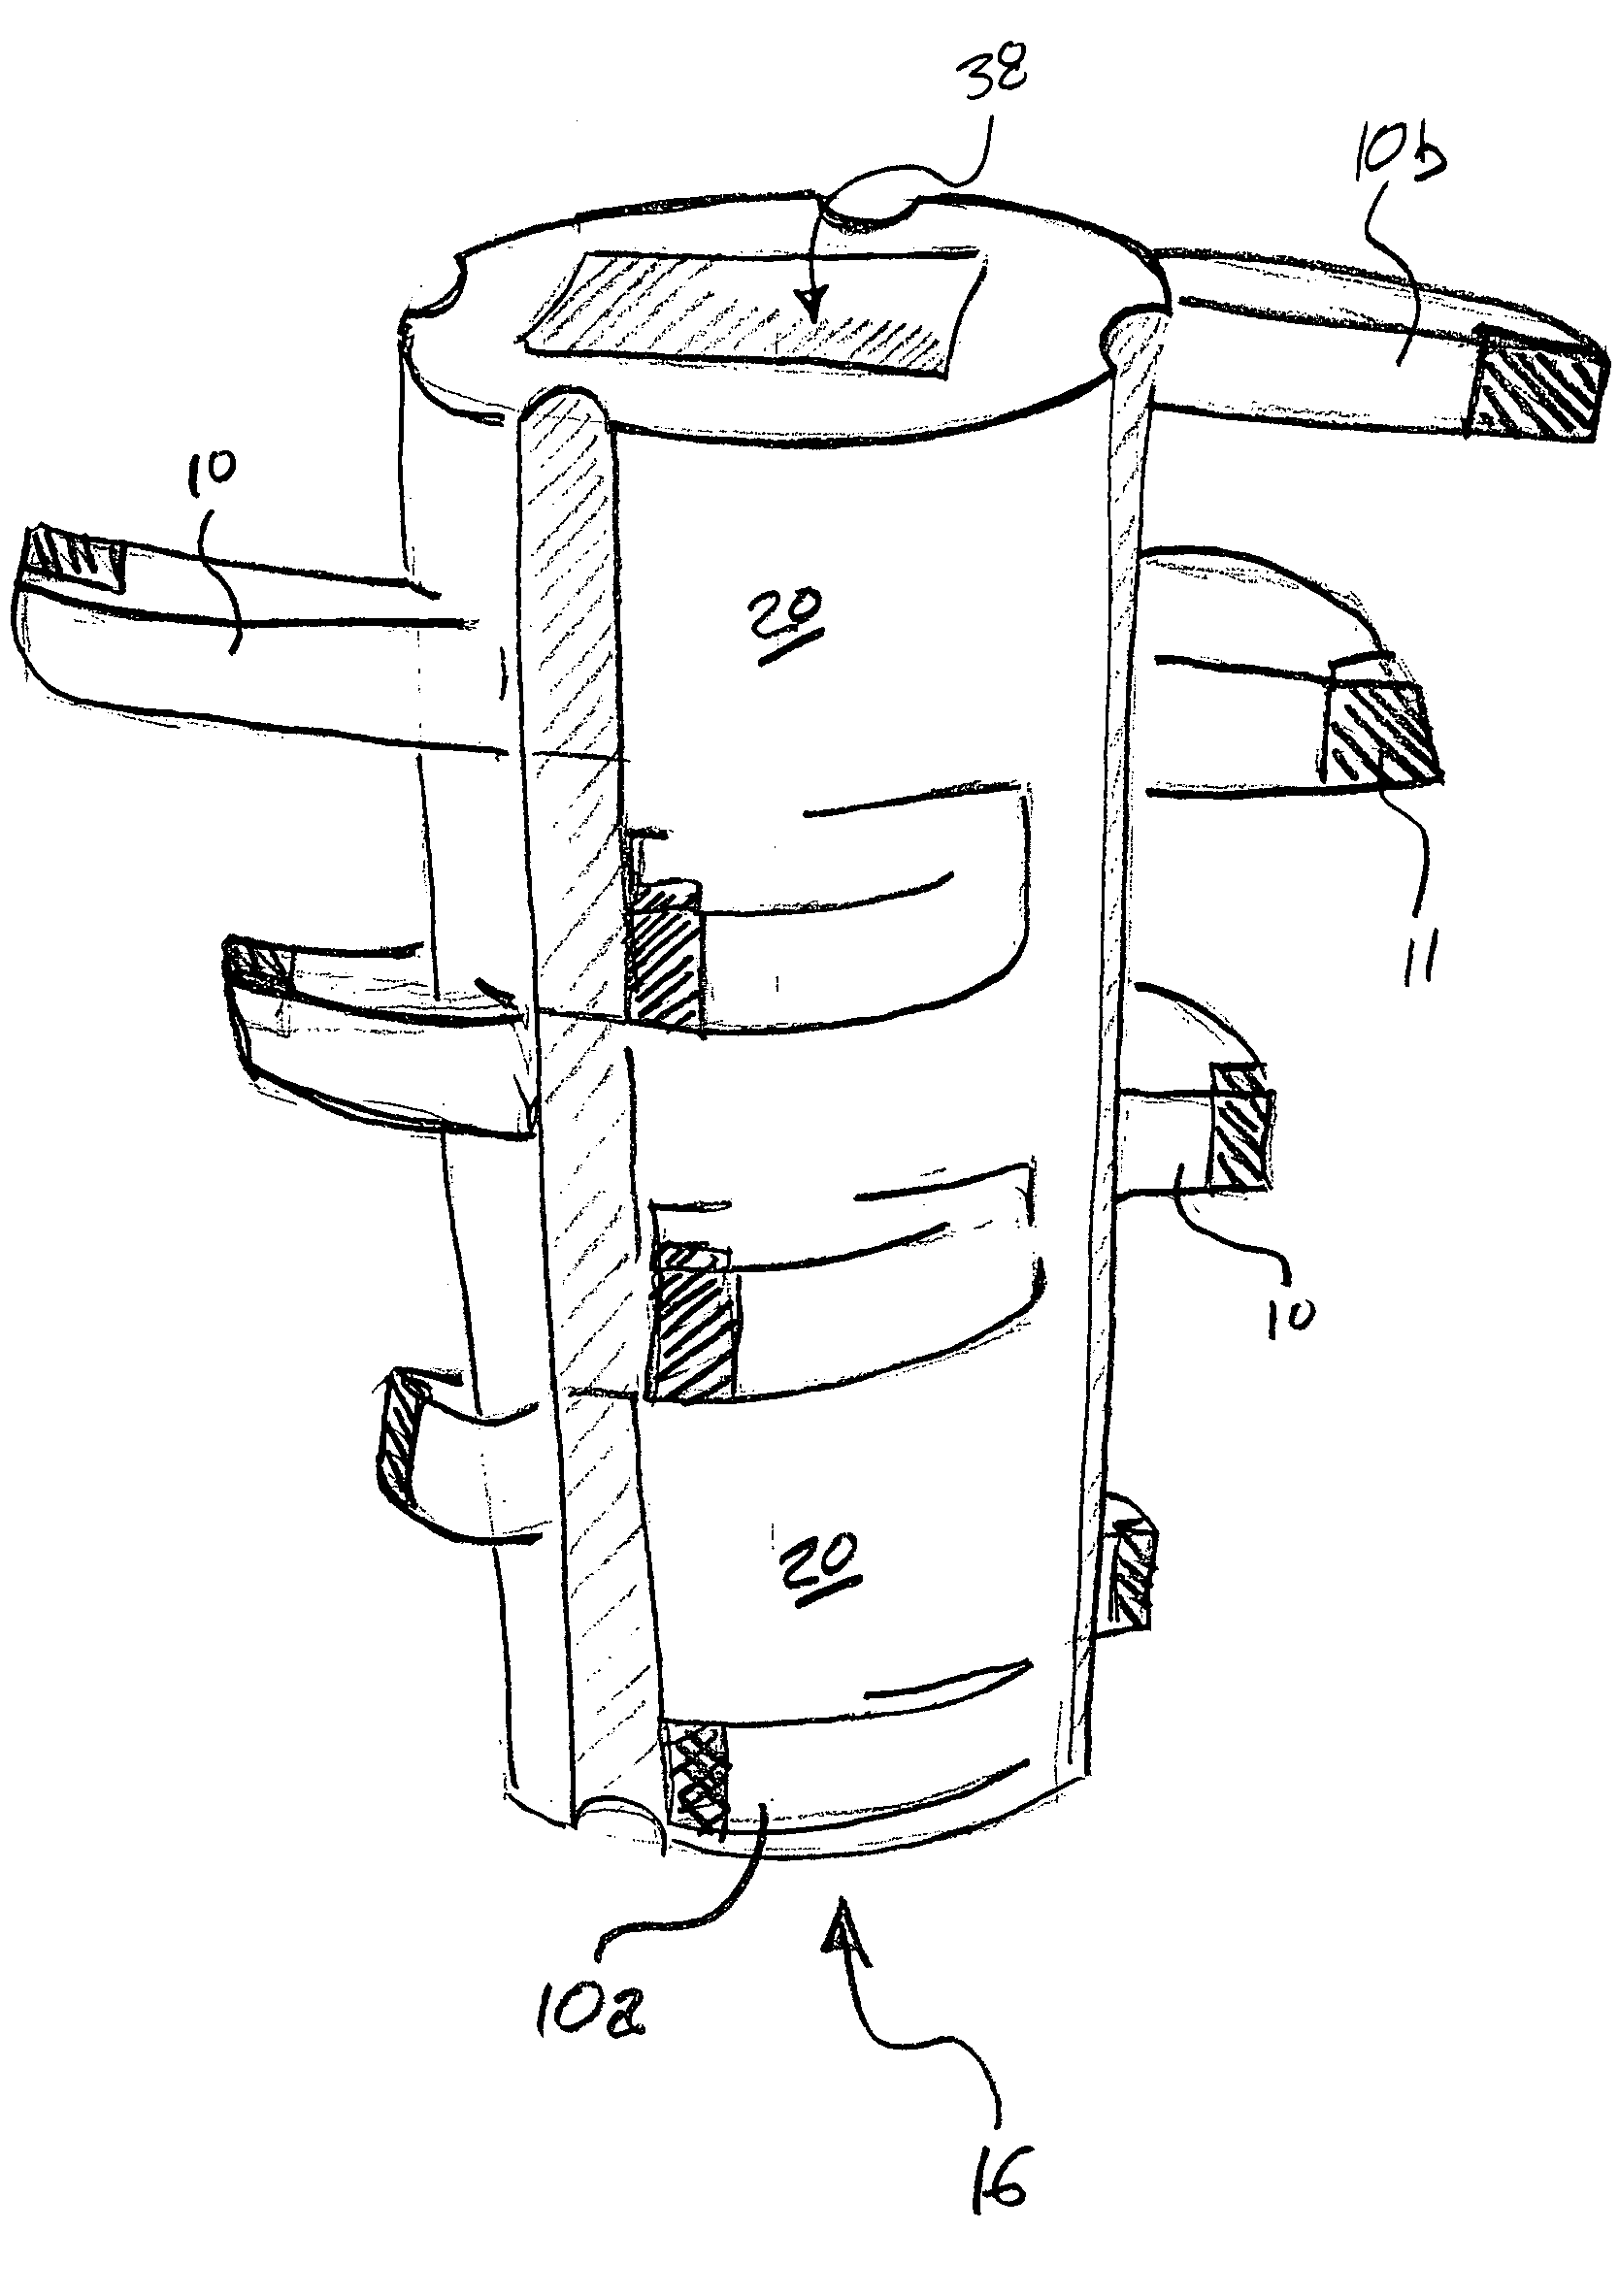 Drilling apparatus, method, and system